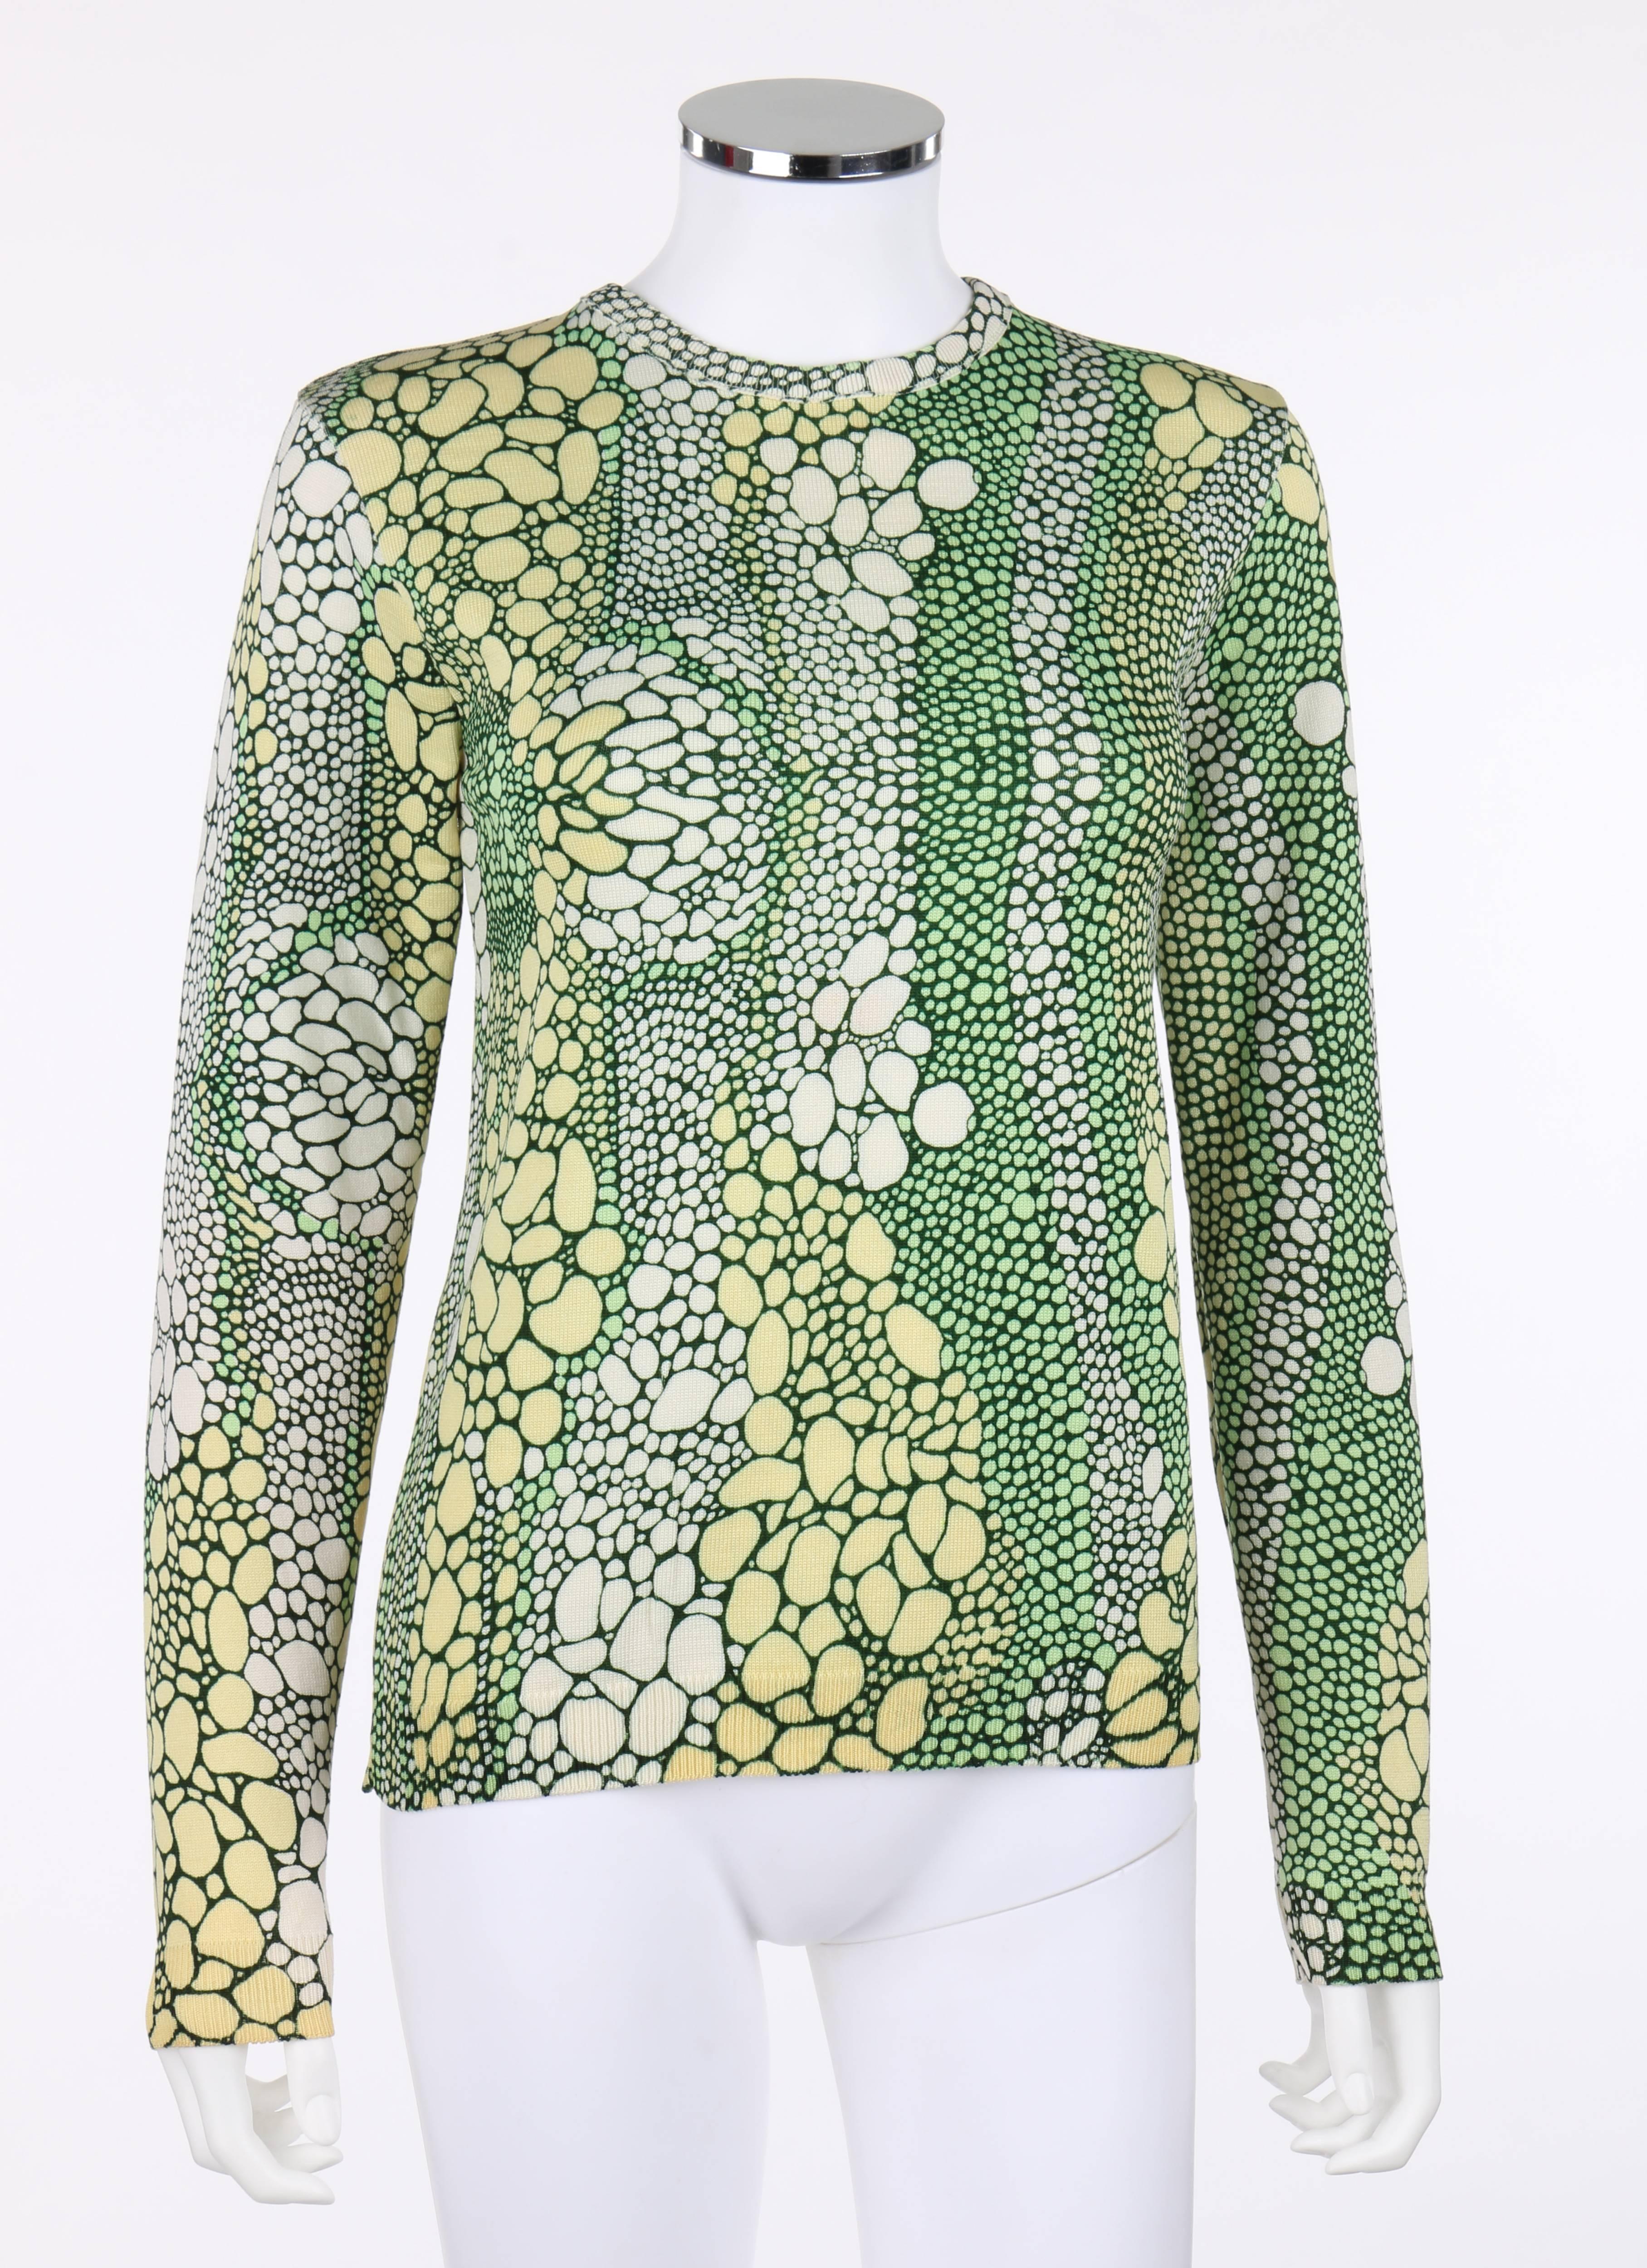 Vintage Givenchy Sport c.1970's green mutlicolor reptile print top. All over reptile print in shades of cream, light yellow, and green. Crew neckline. Long sleeves. Rib knit trim around collar, cuffs, and hemline. Pull over style. Unmarked Fabric